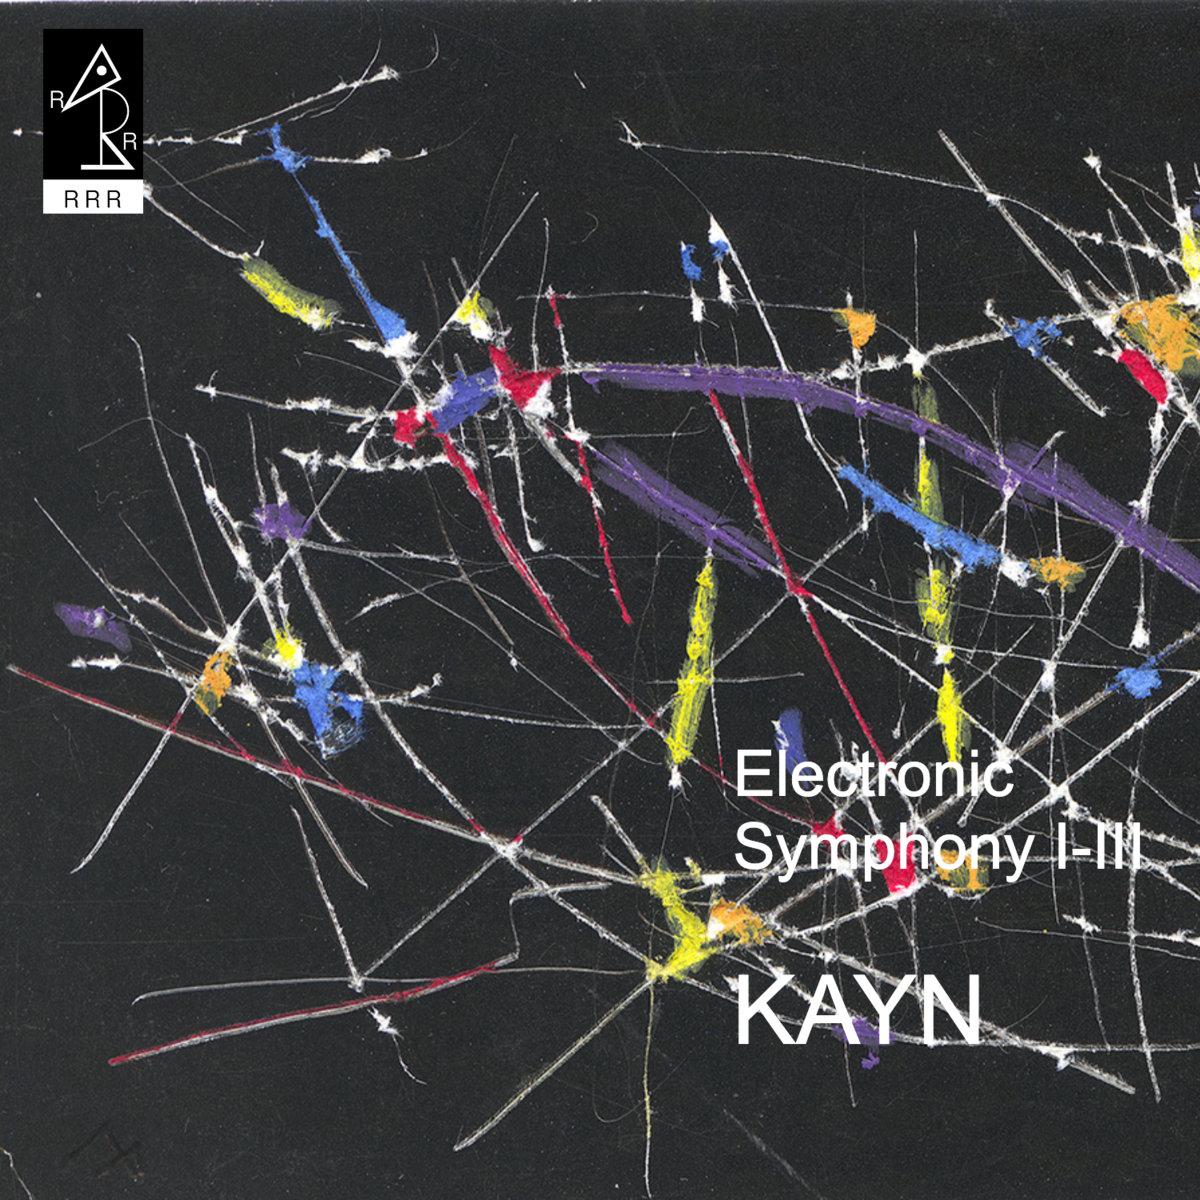 Album cover for Roland Kayn's Electronic Symphony I-III.